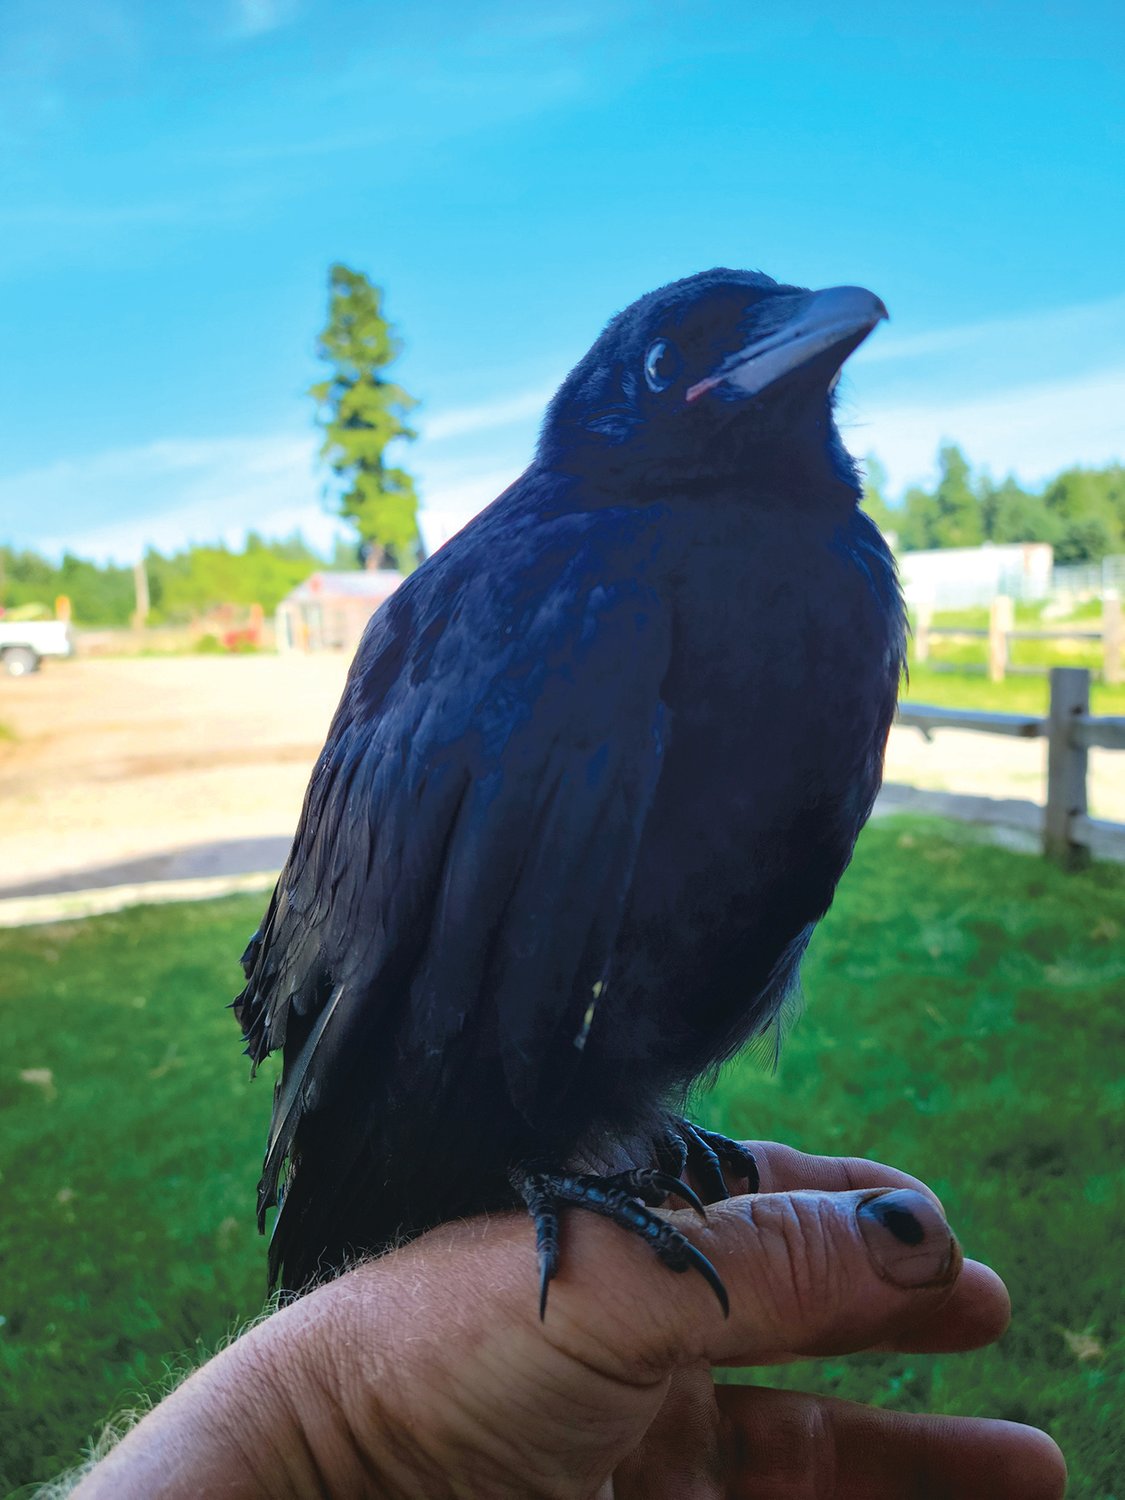 "Mr. Snow" the crow perches atop rescuer John Wilson's hand at the man's residence in Rainier.